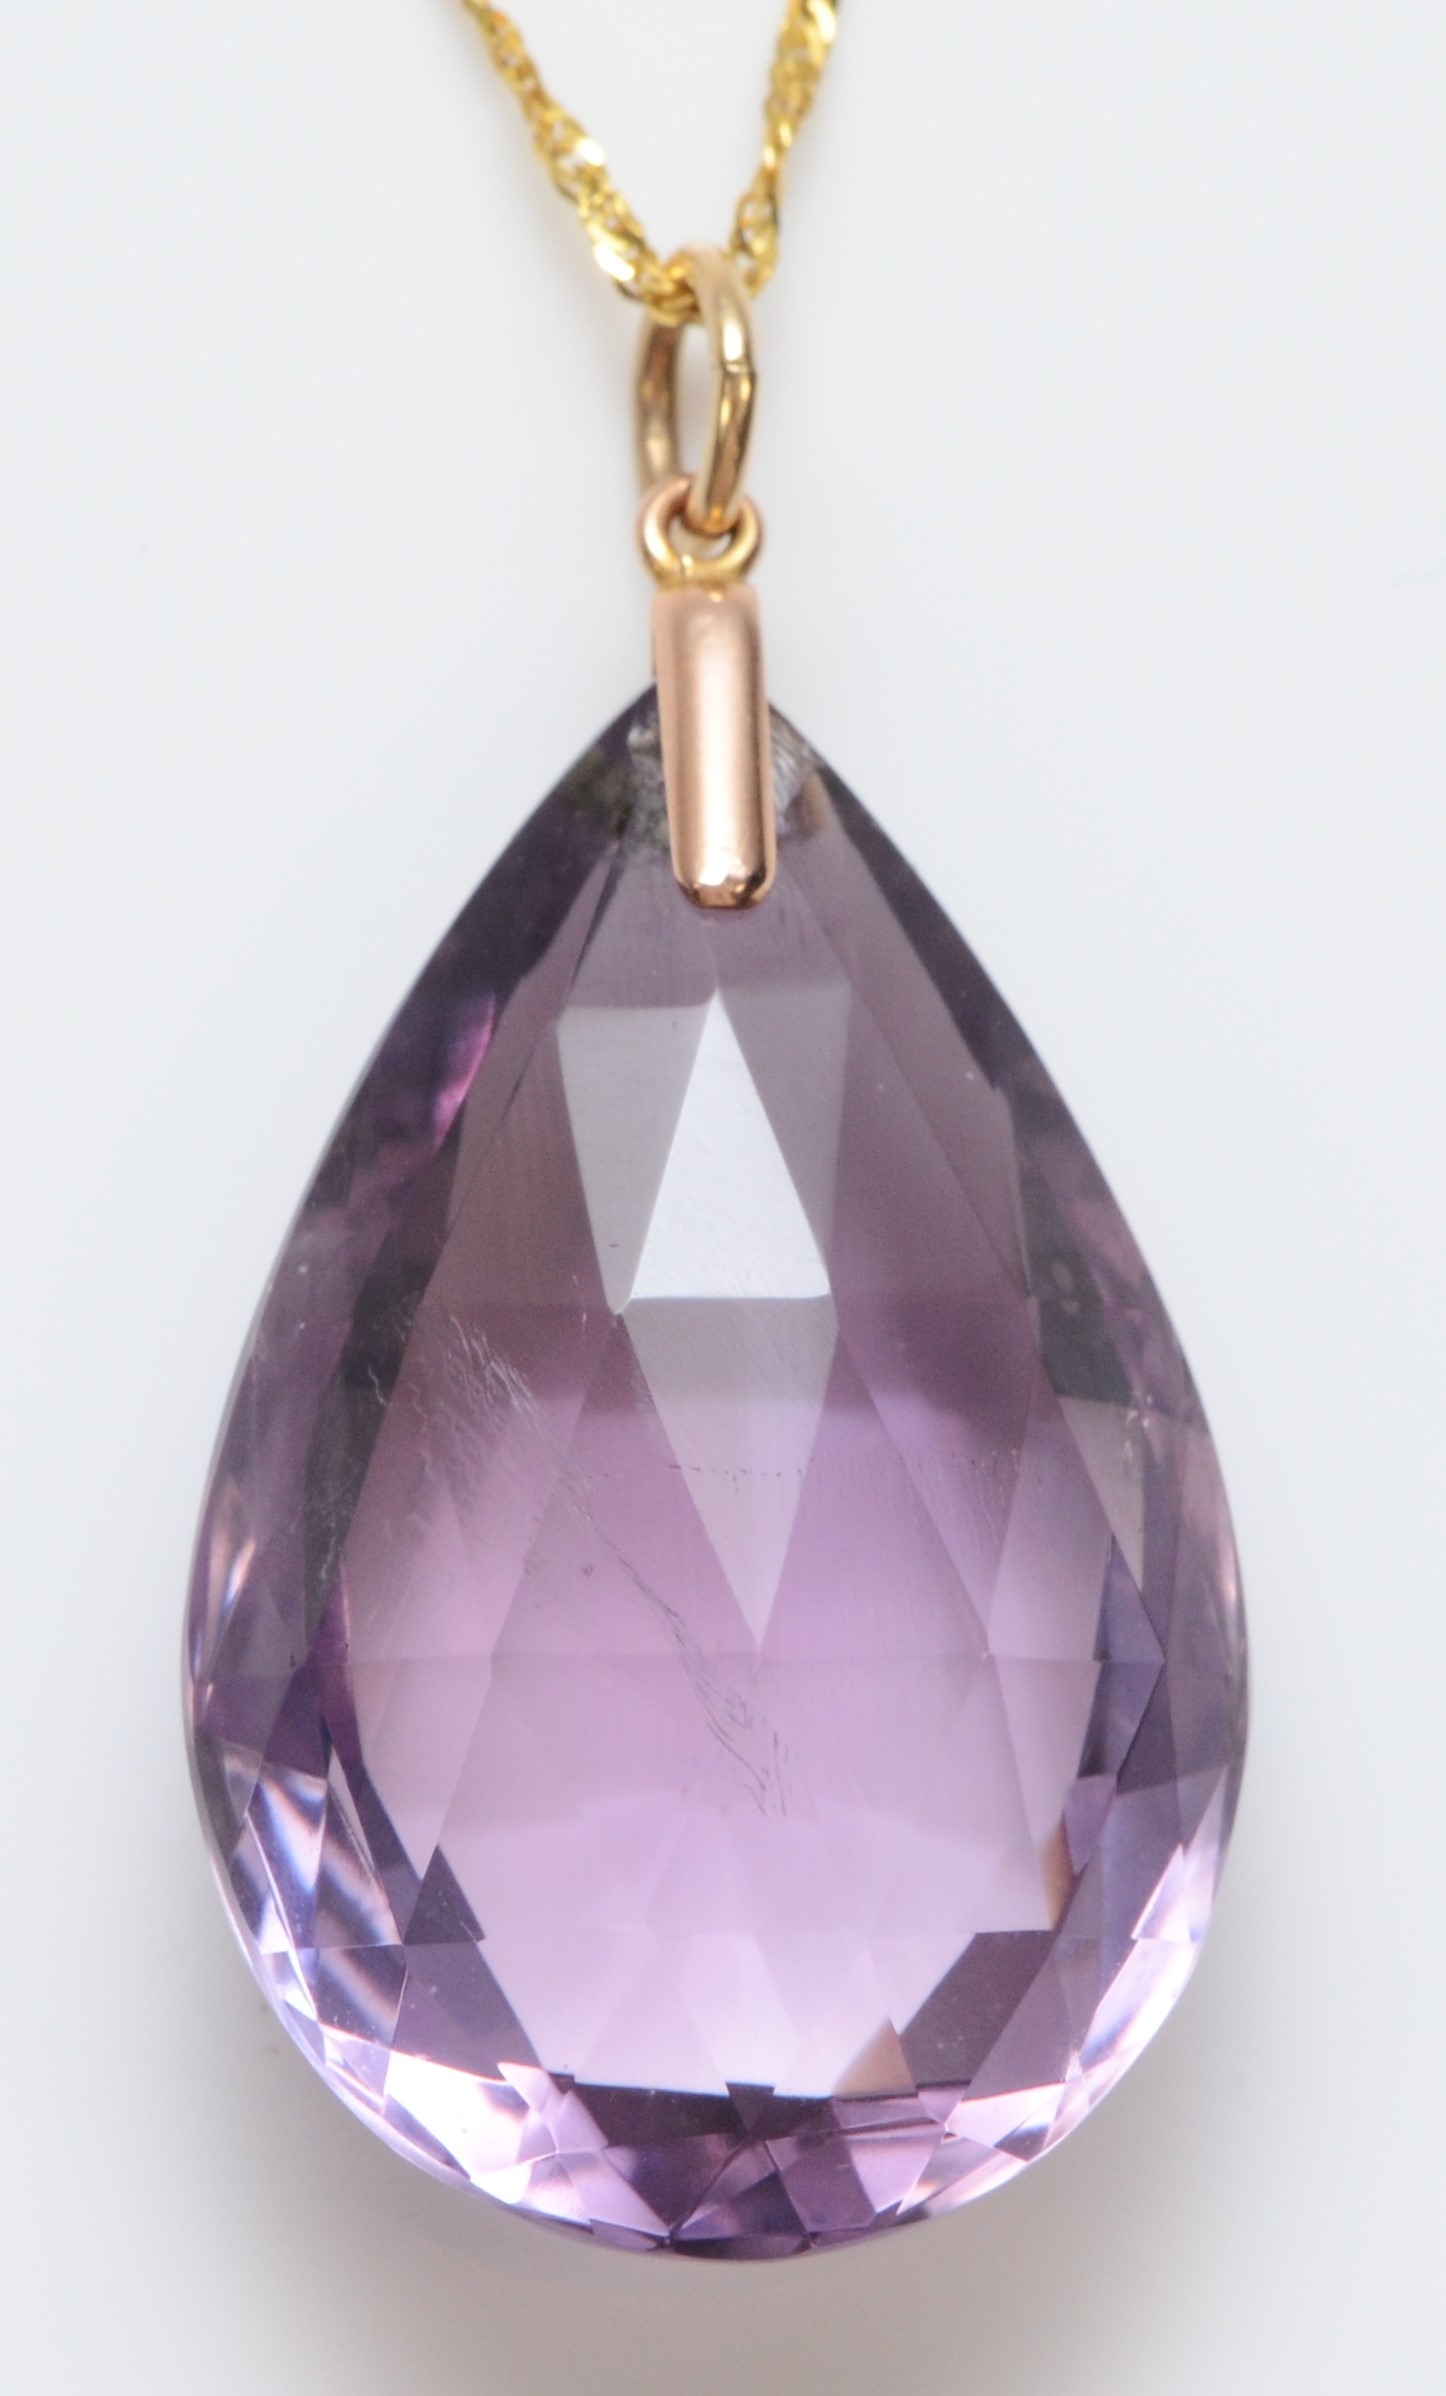 A vintage 9ct gold mounted large facetted amethyst pendant, 31 x 20mm, 9ct gold chain